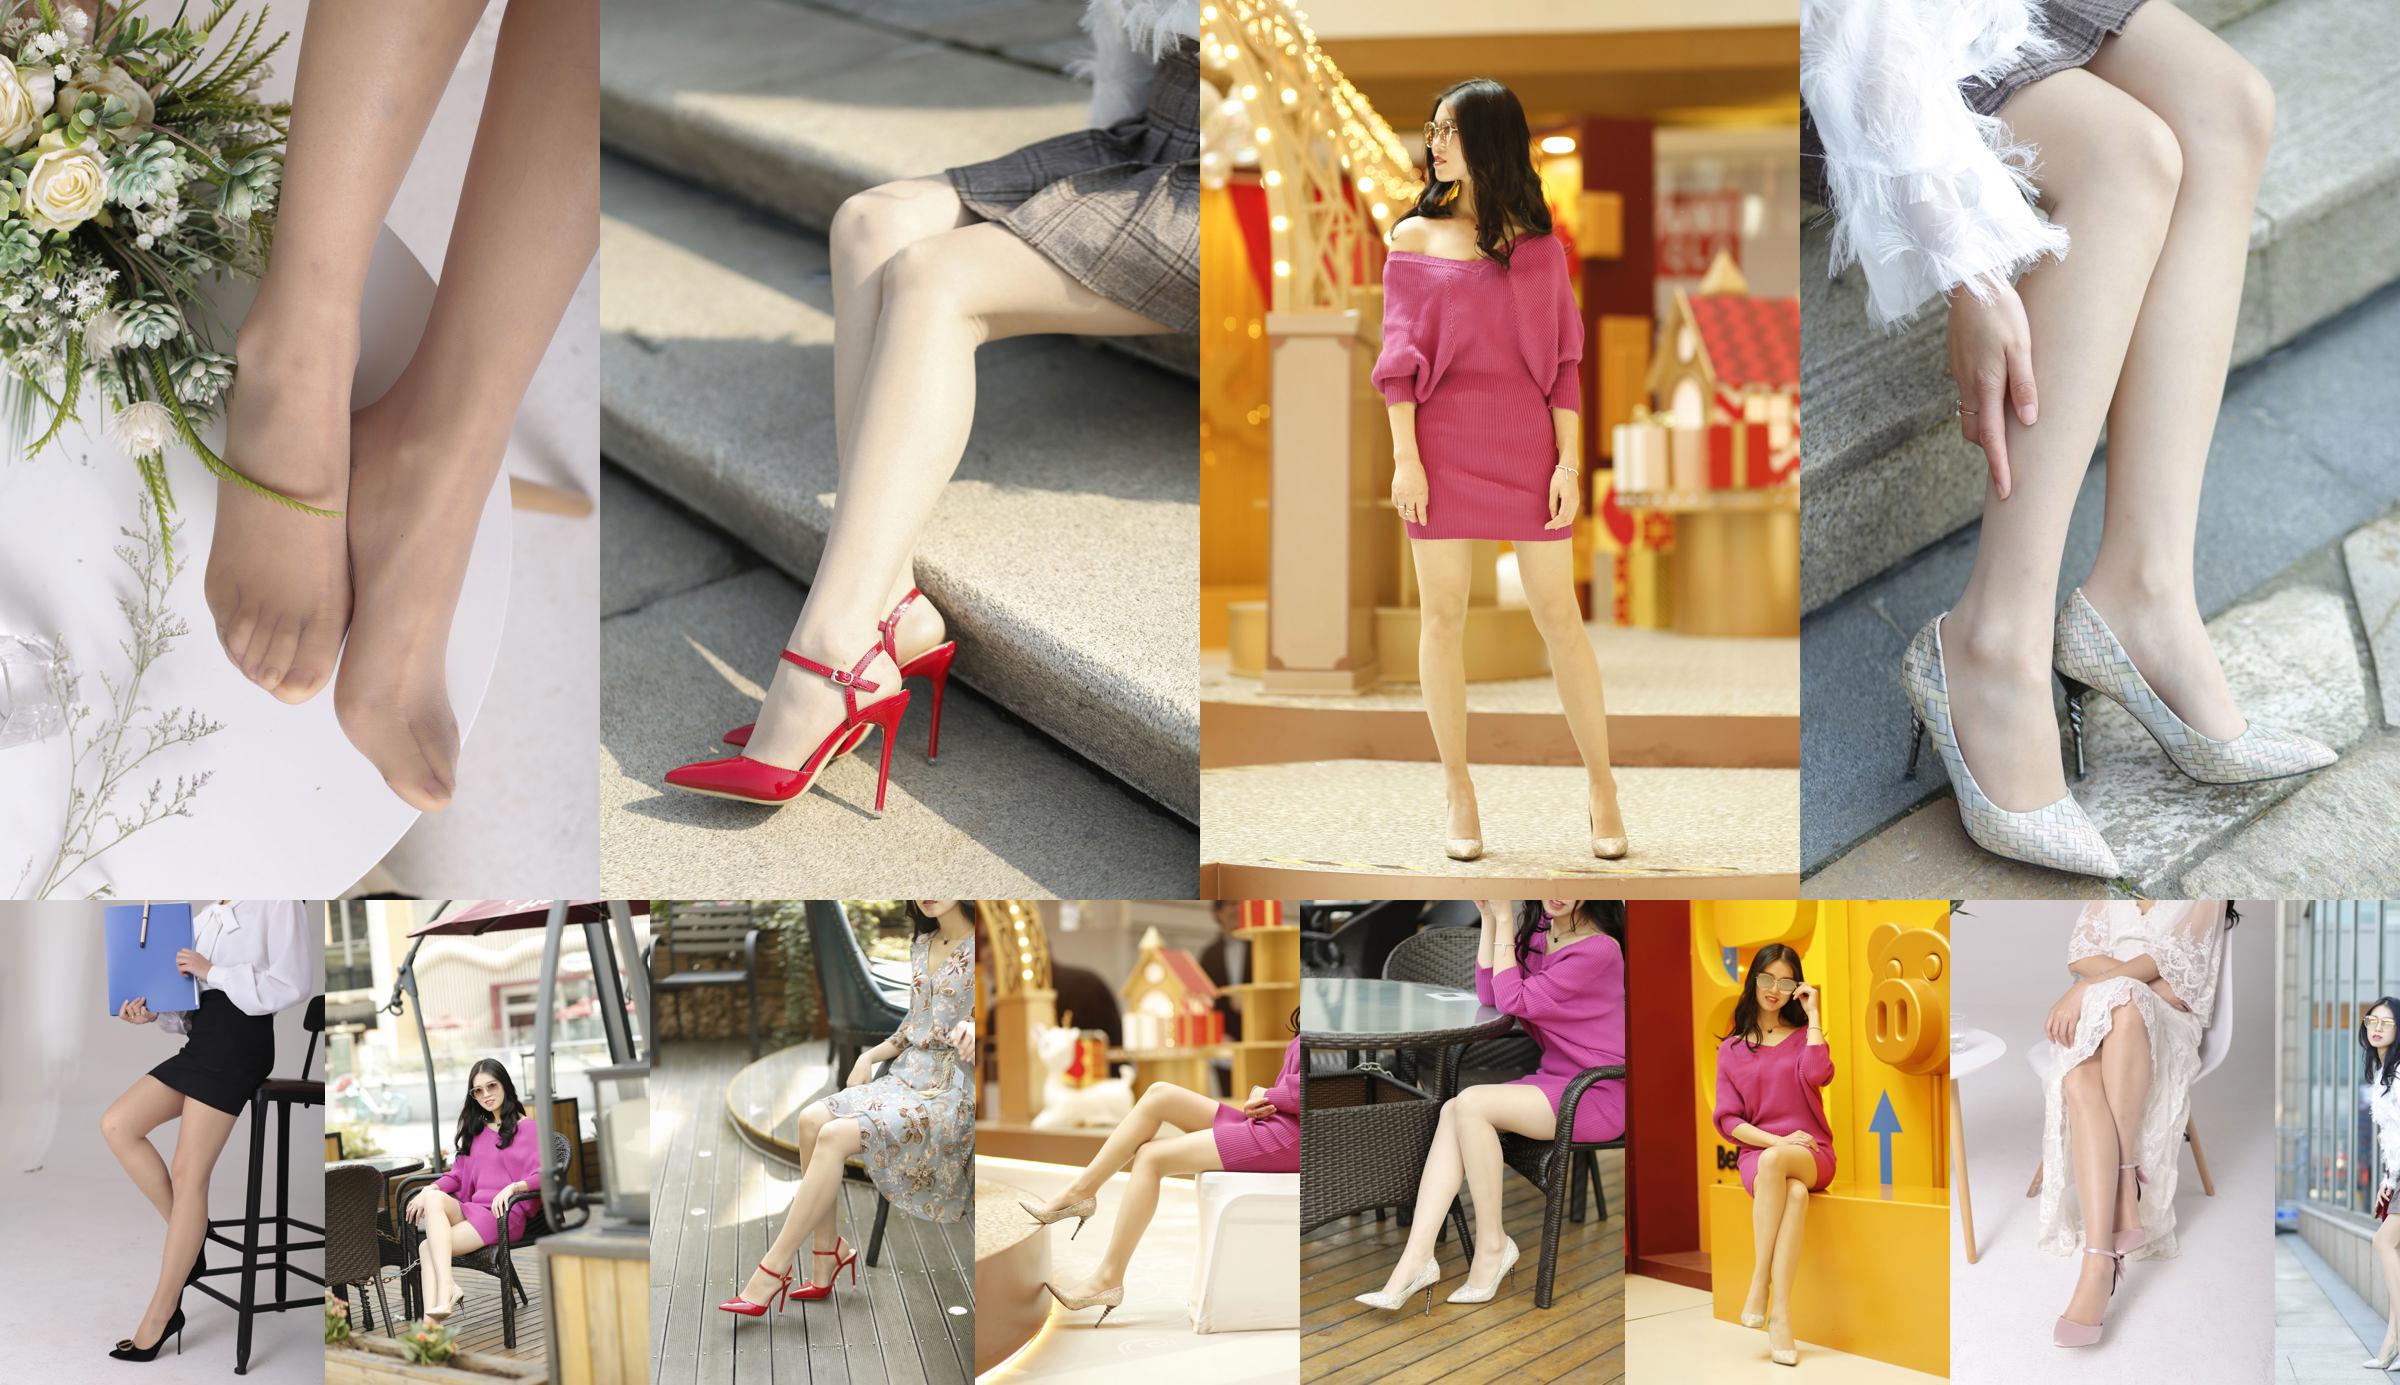 [Ness] NO.082 Xiaomin woven pattern high heels No.6f9d8c Page 16